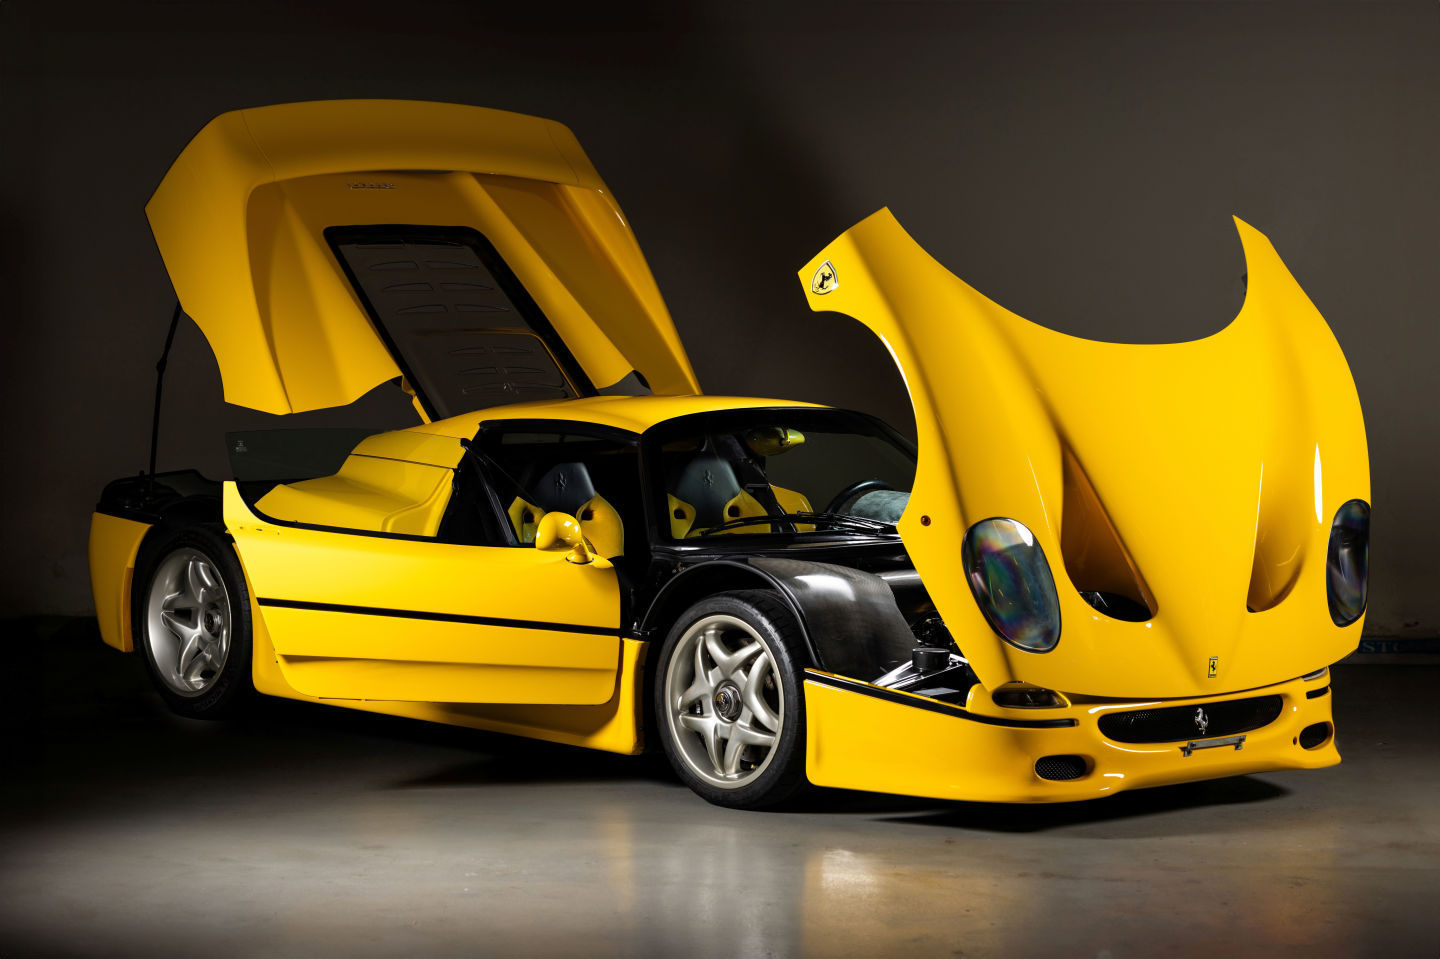 Front angled view of a yellow Ferrari F50 with all doors and hood opened